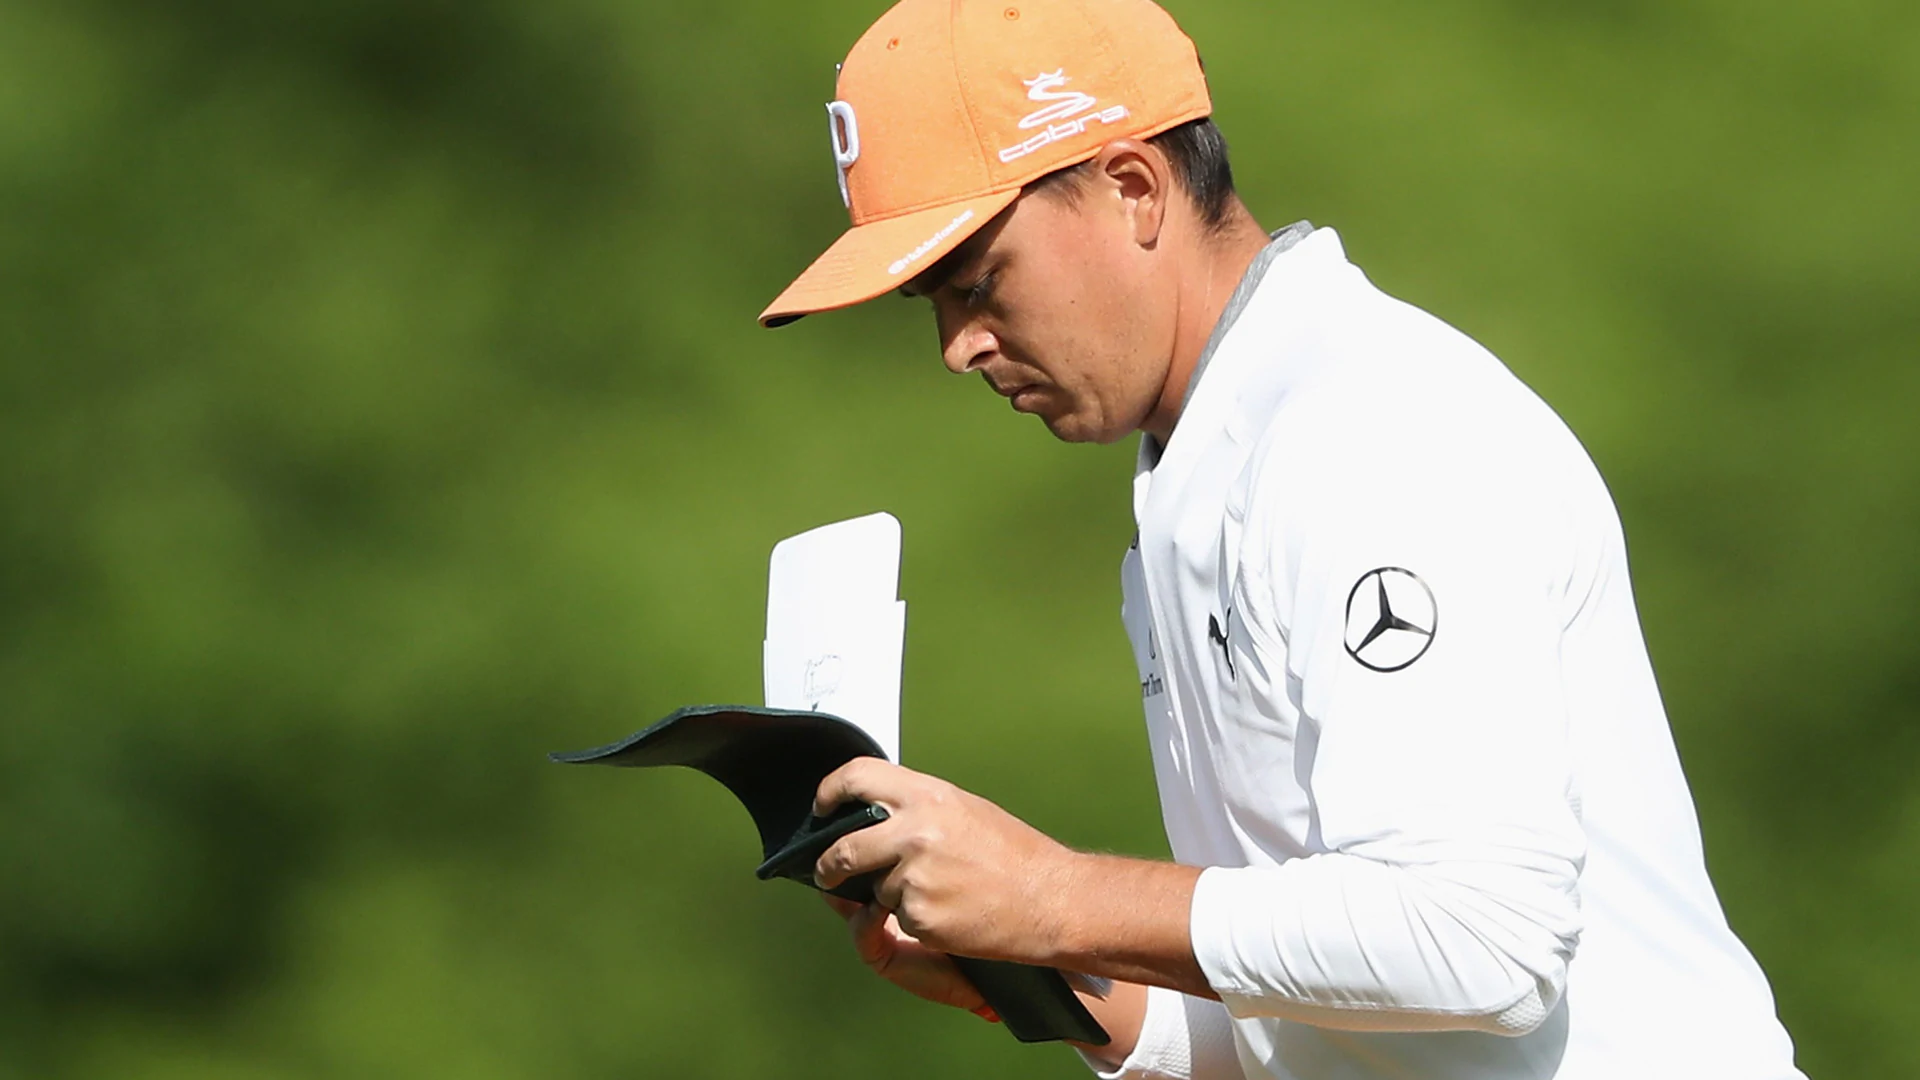 Podcast: Chamblee says Fowler needs 'arrogance'